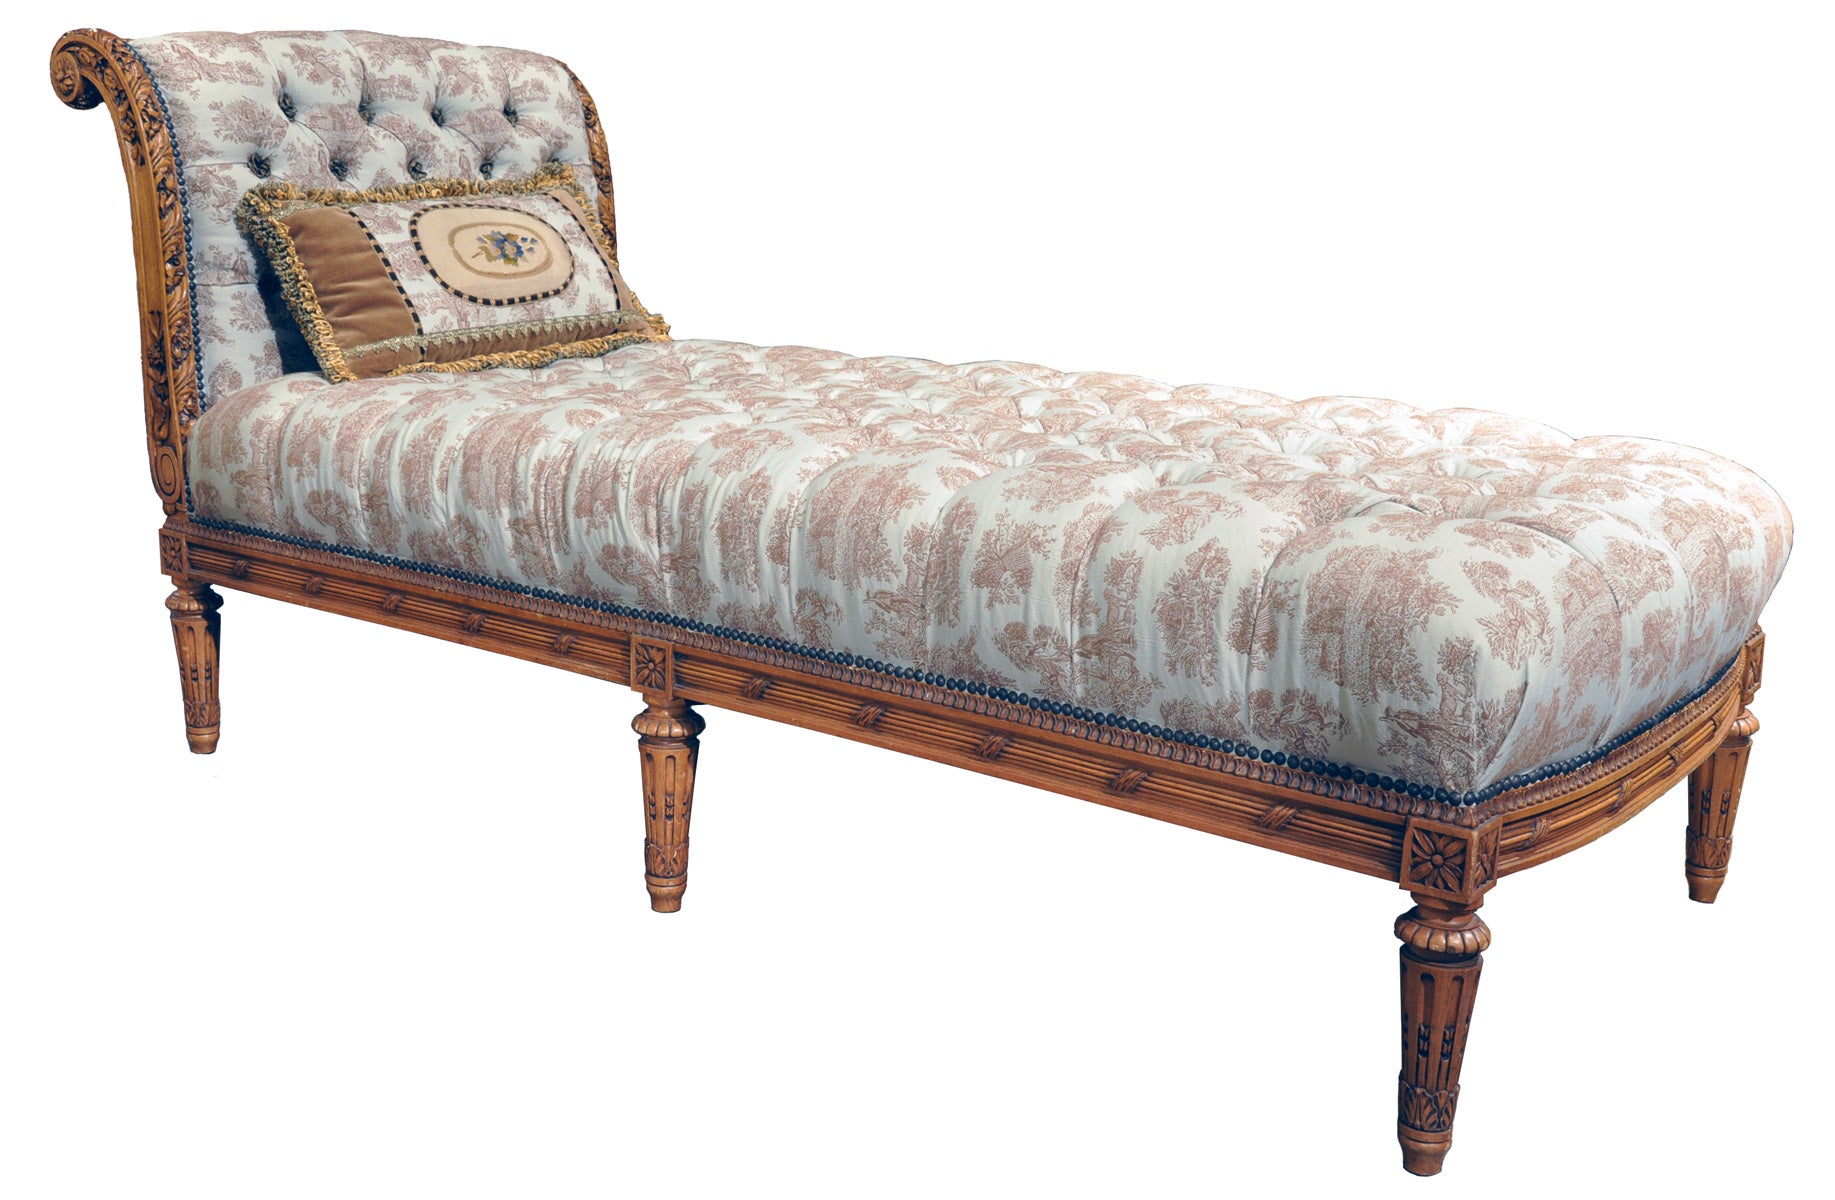 19th C. Louis XVI Carved Chaise